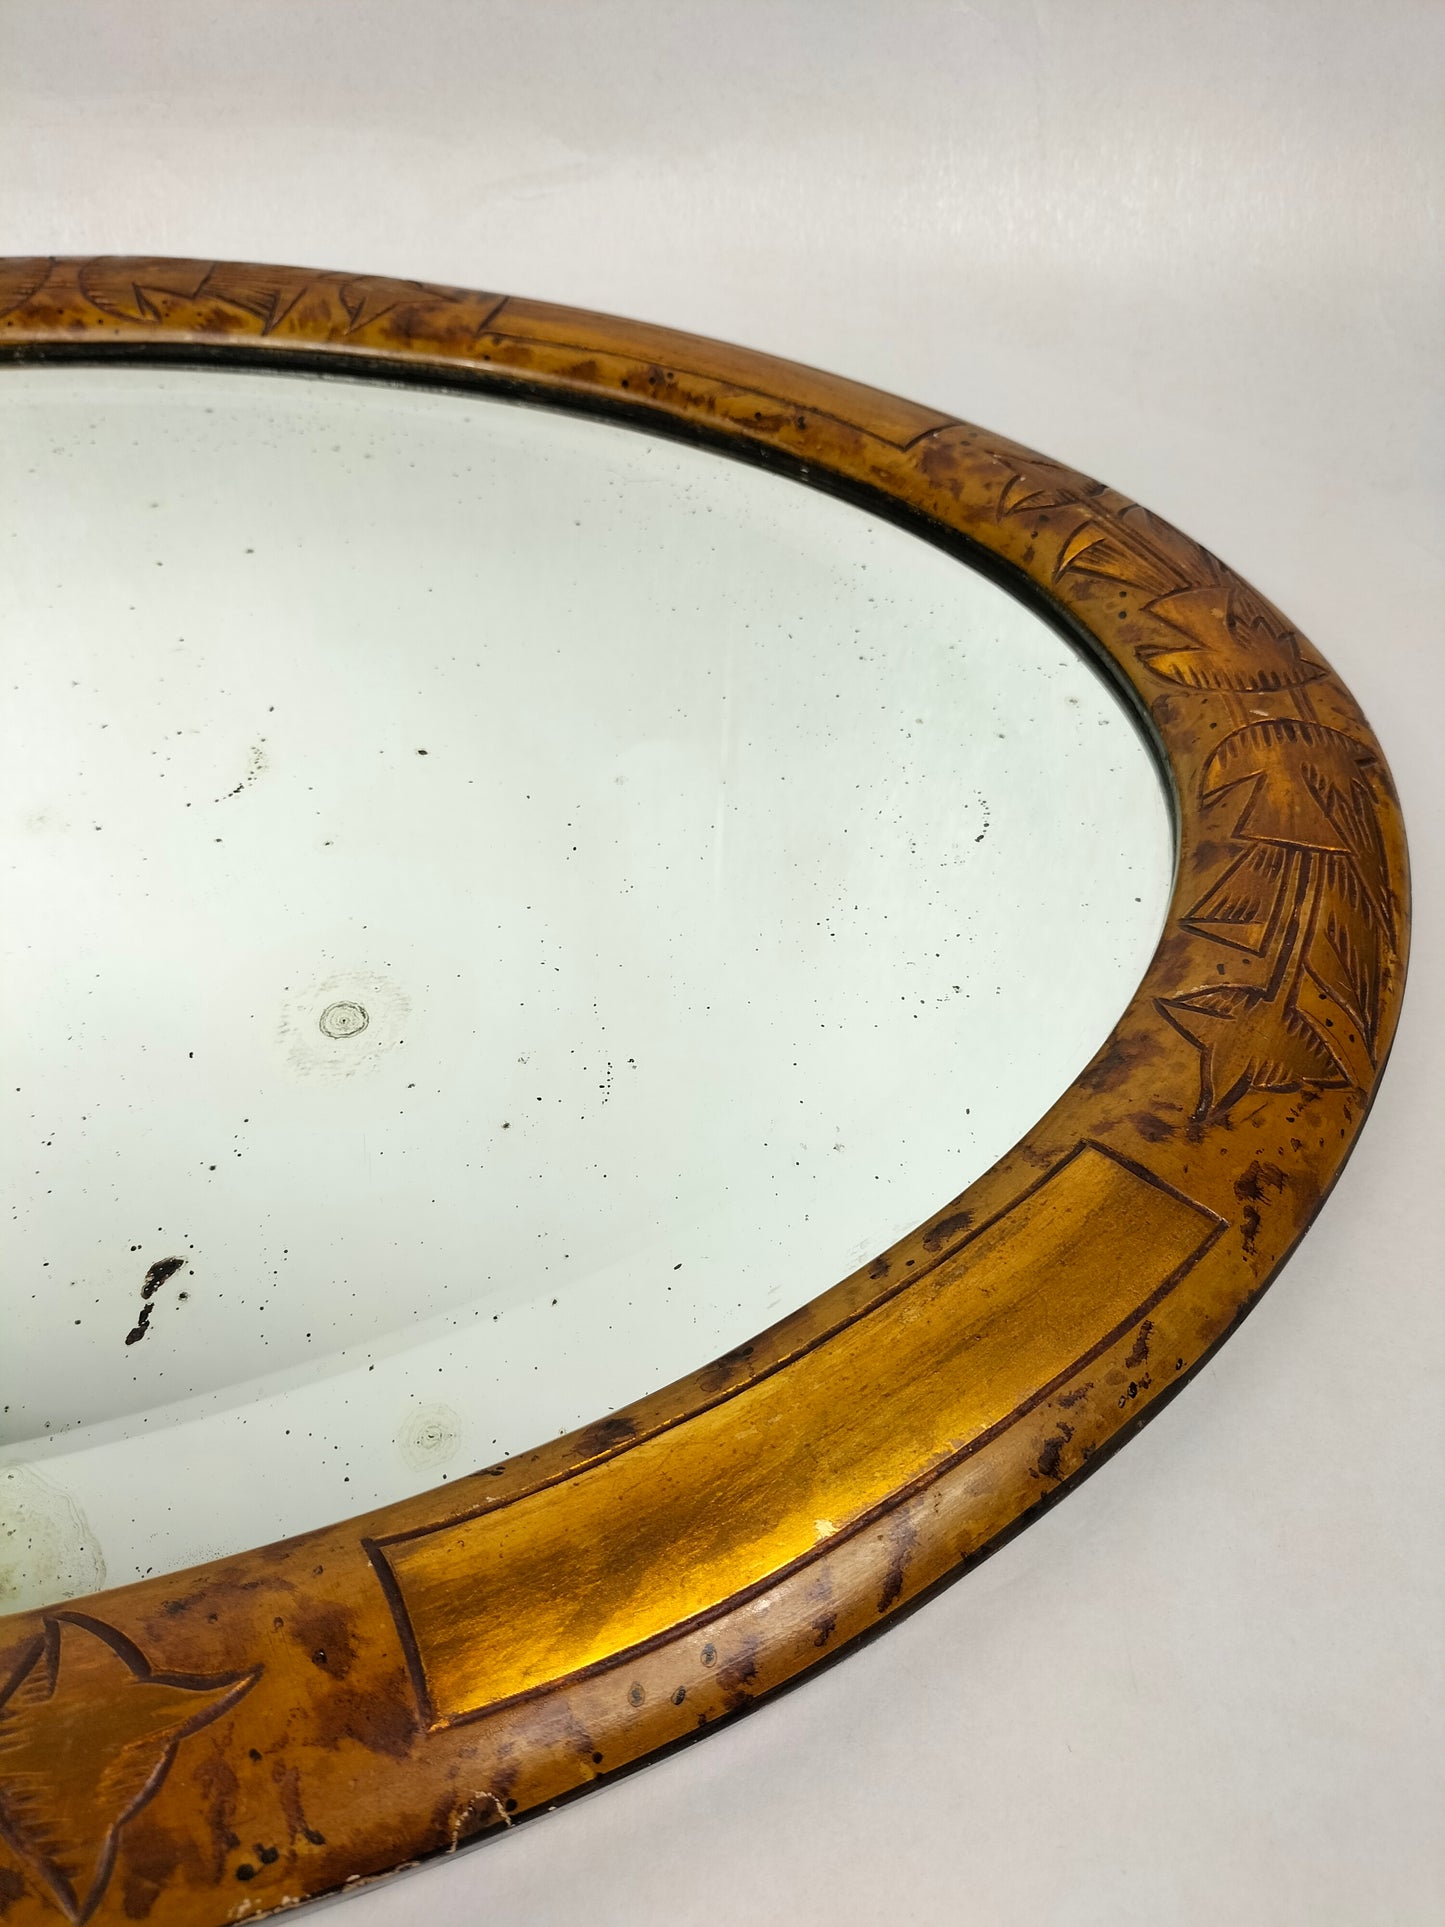 French oval art deco mirror with stylized wood carving // 1930-1950